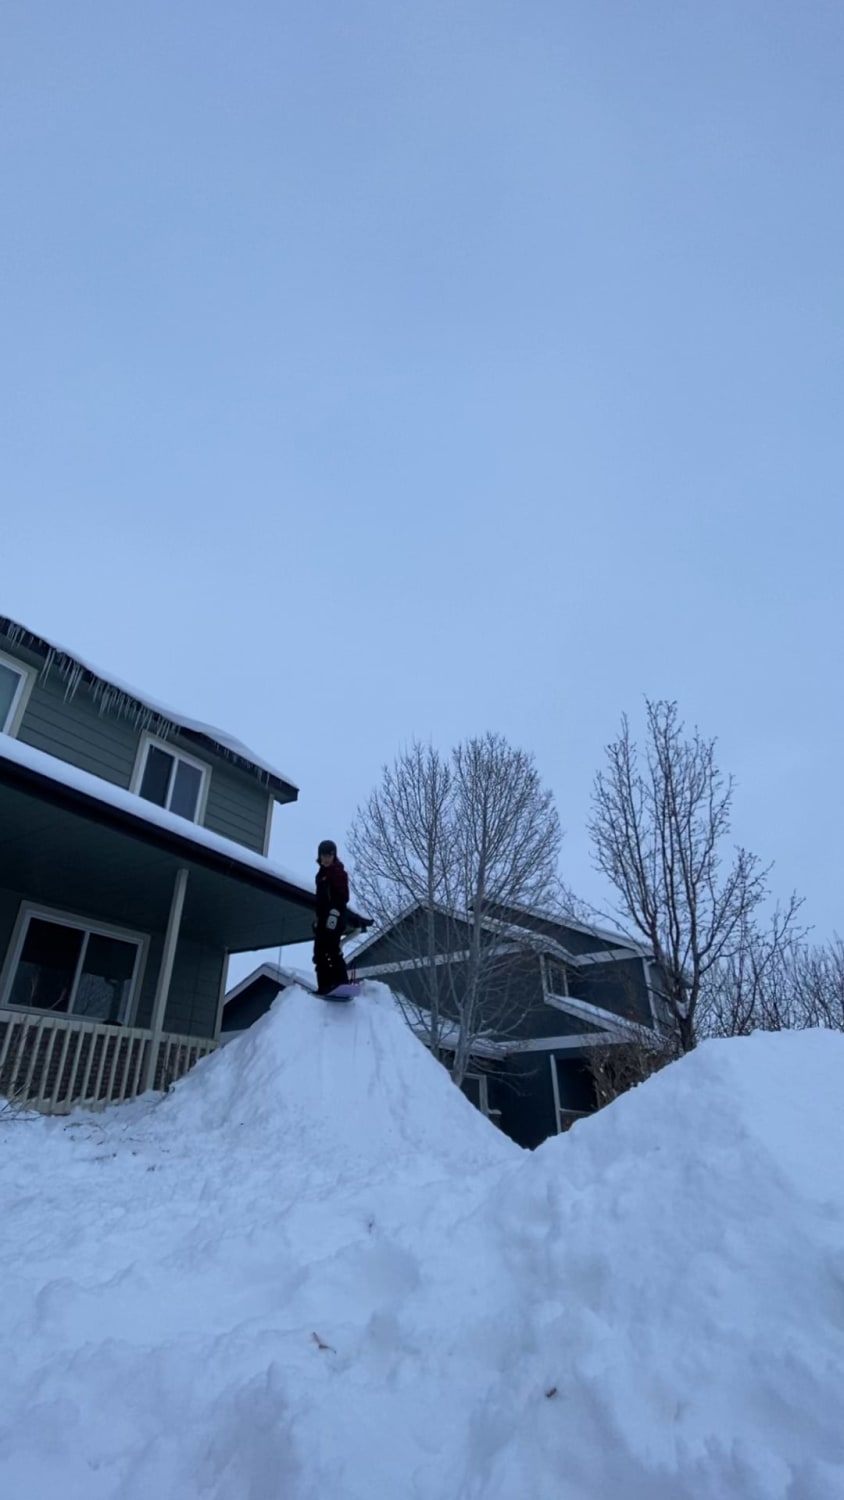 With all the Snow Northern CO got figured you guys would appreciate the jump my friends and I built in the front yard at my house. Been working on my 180s for almost a year now and finally started to land them. Can’t wait to get to the real park!